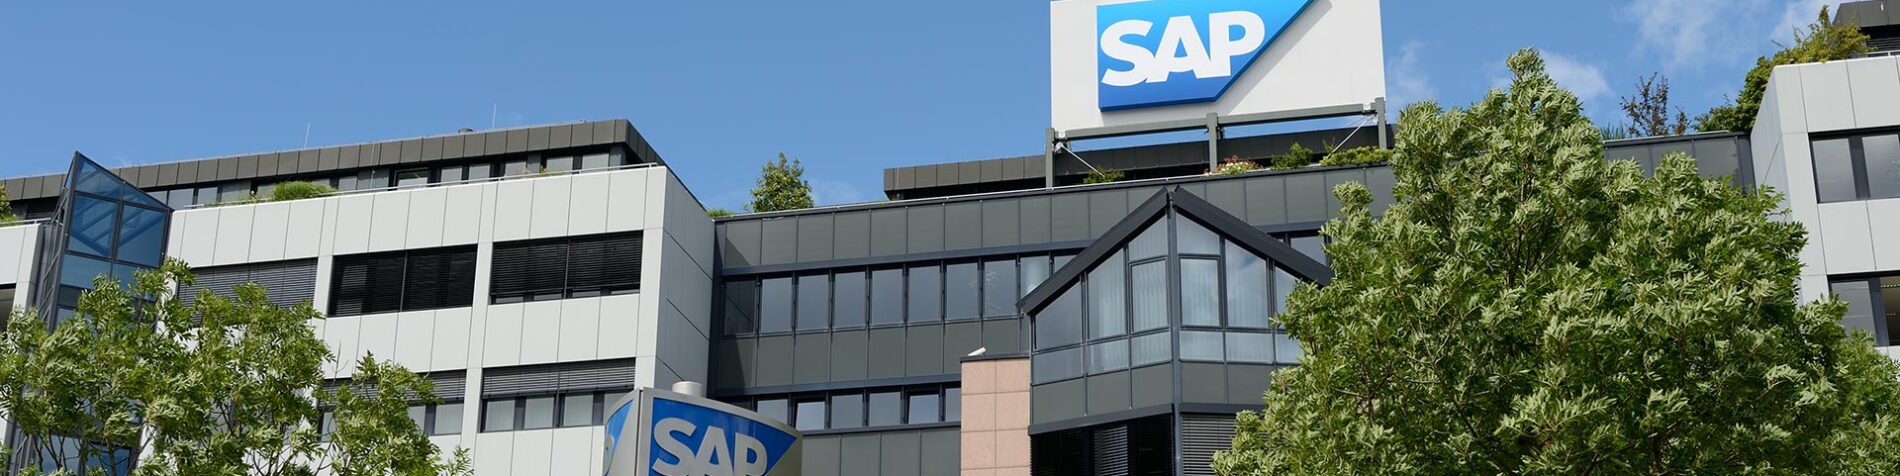 SAP to Announce Results for First Quarter of 2018 on April 24